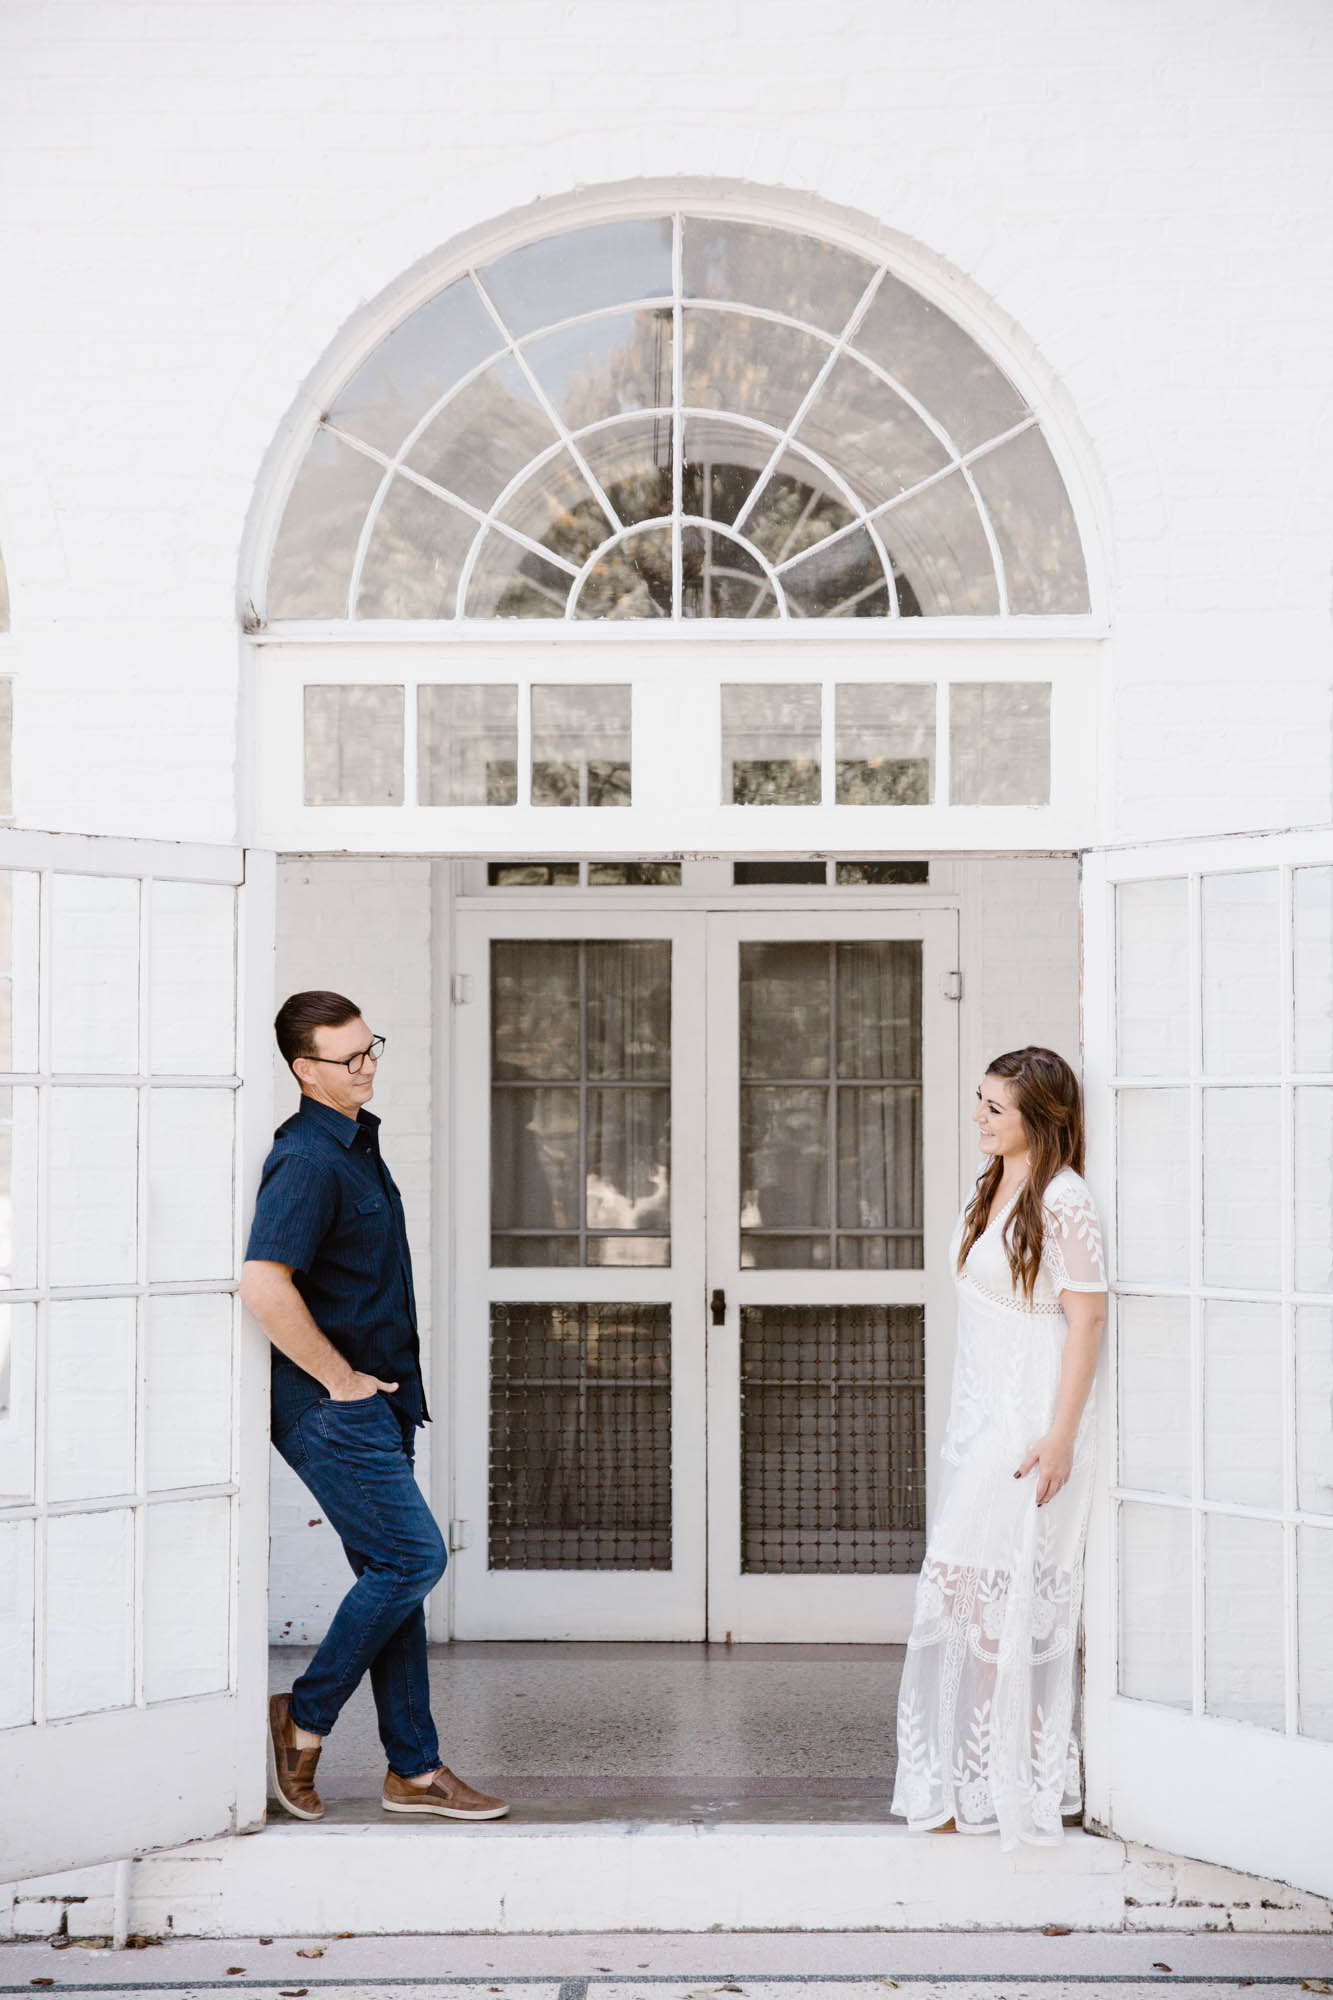 The Bleak House Engagement Session Location